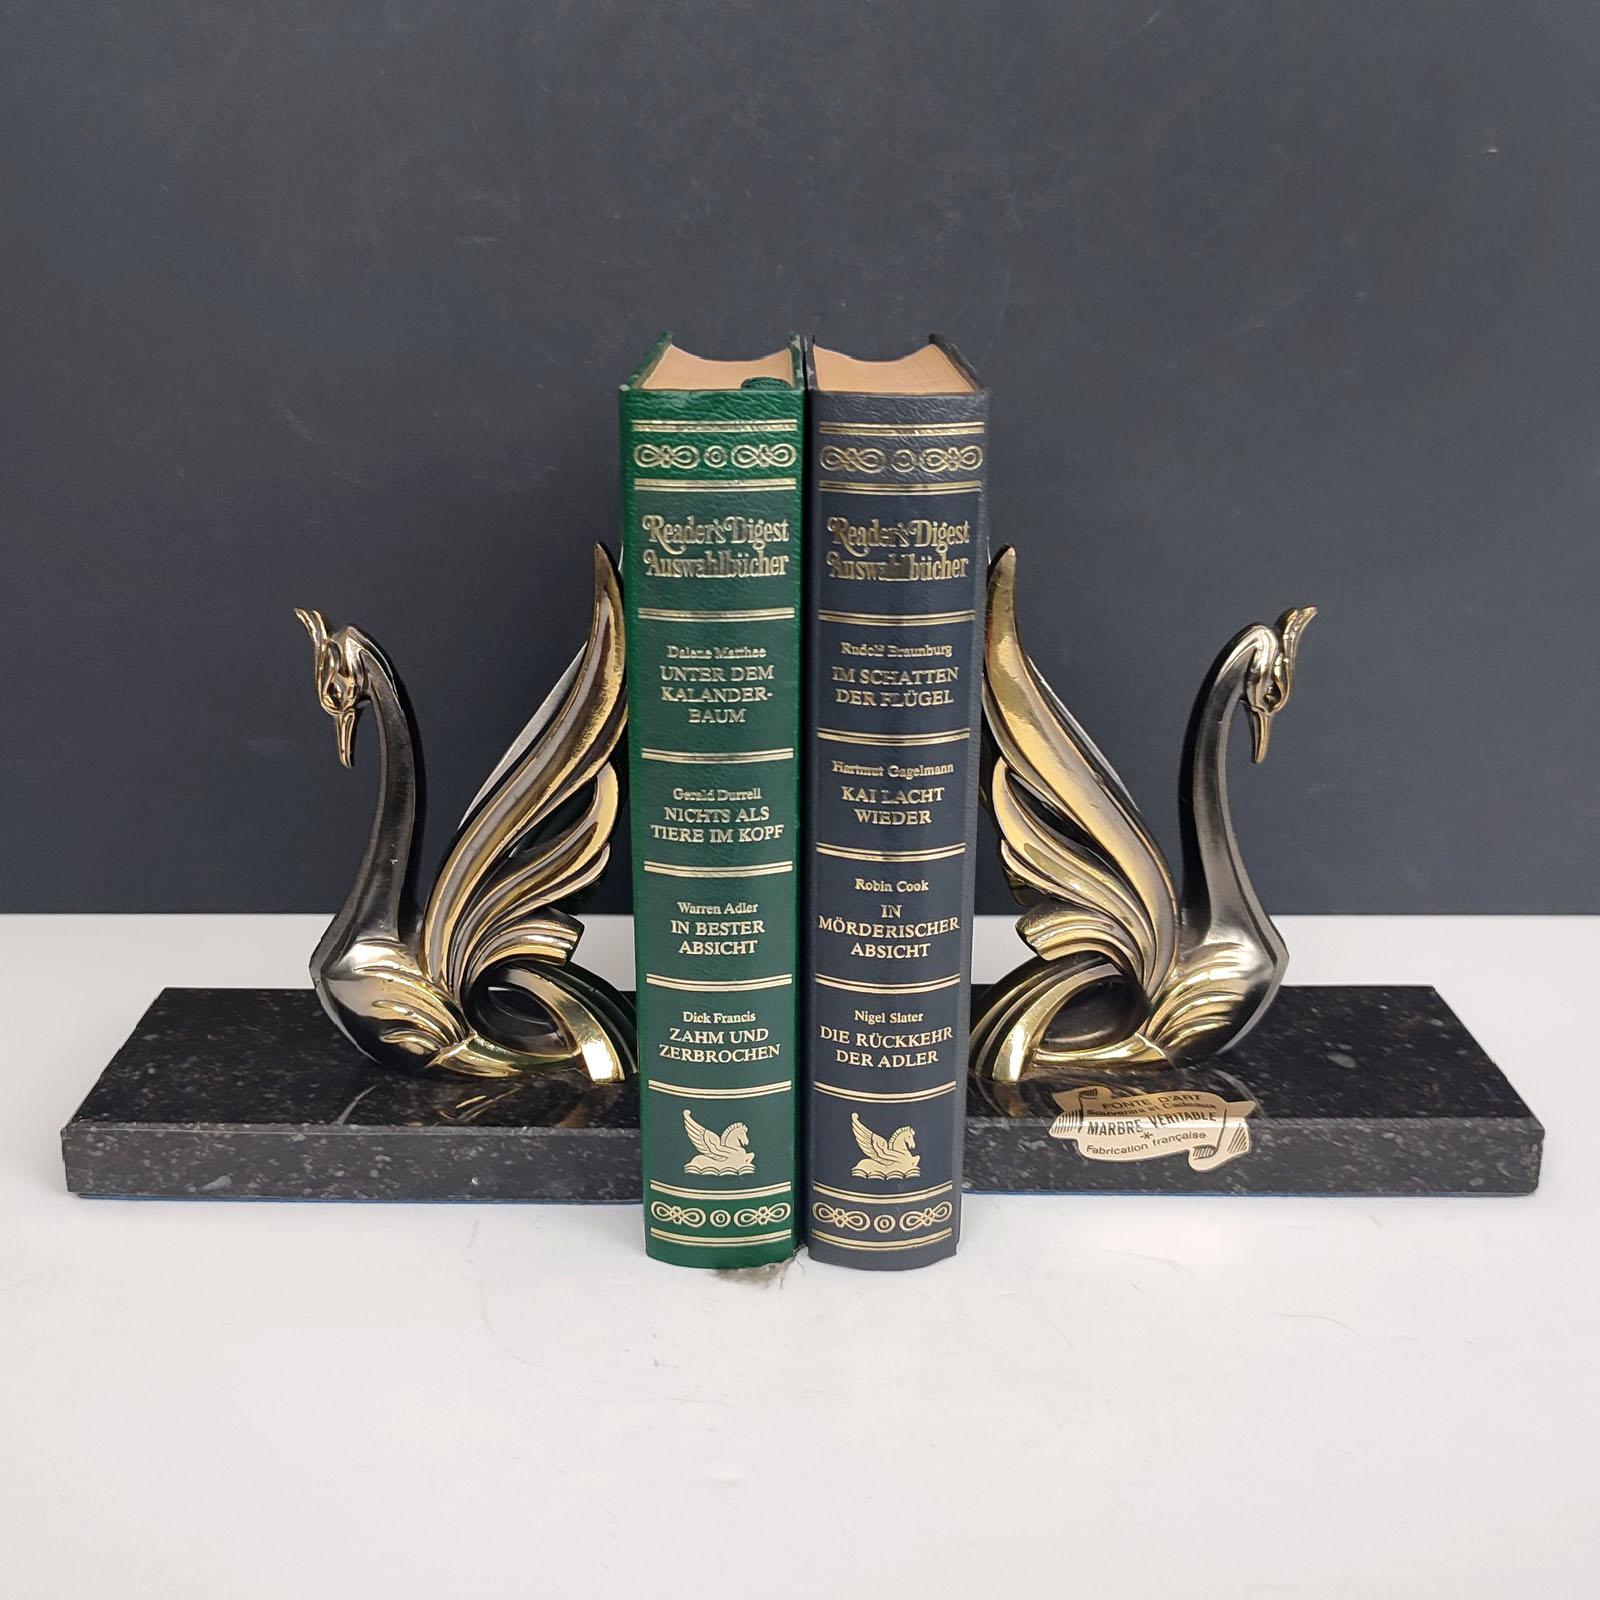 Pair of midcentury vintage cast metal polished decorative swan bookends on marble bases. 
Great for holding up books on a bookshelf or as paper weights on a desk or decorative heavy birds animal sculptures around the house.
This stunning vintage